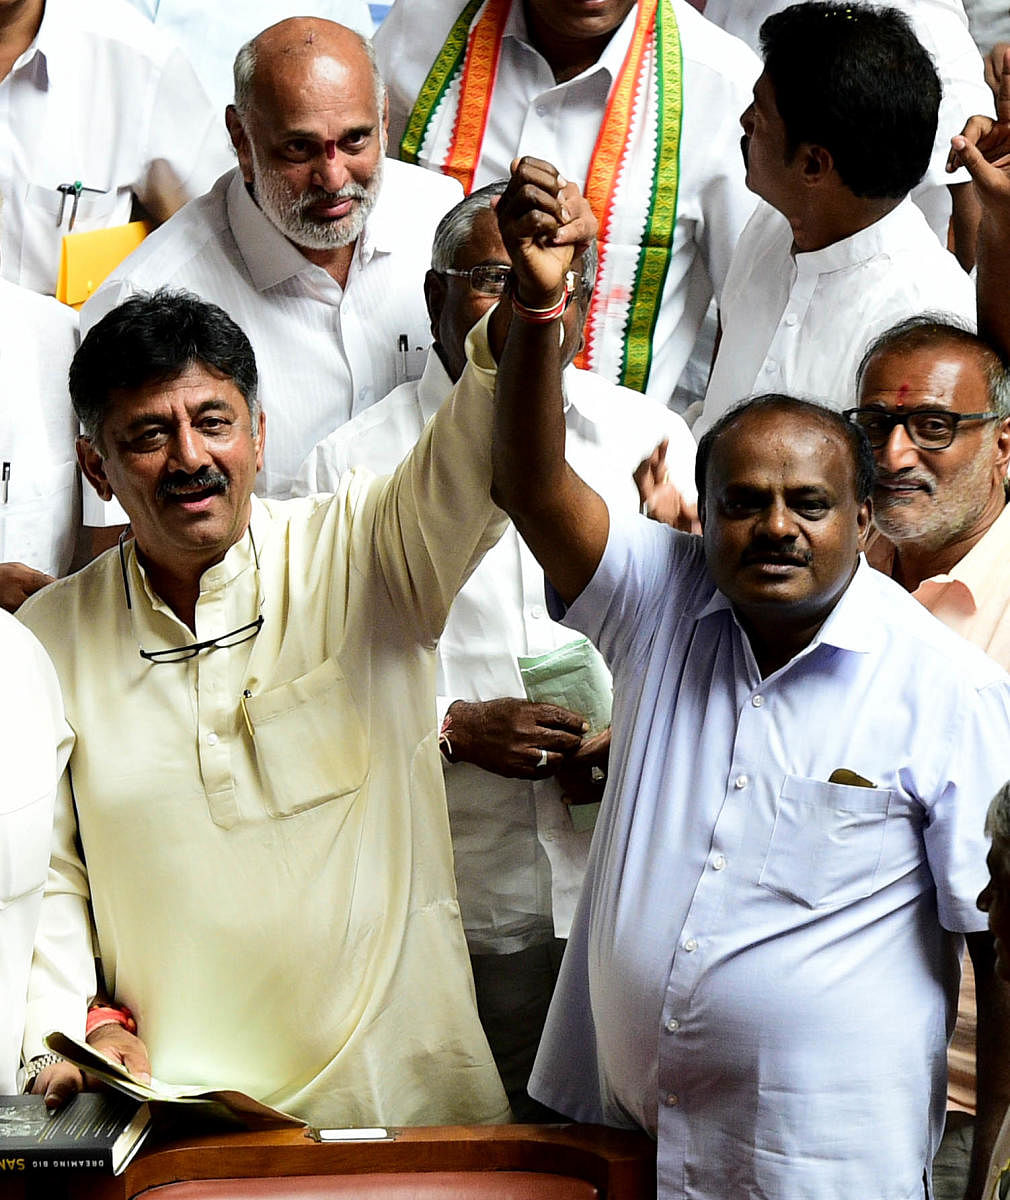 Congress leader D K Shivakumar and JD(S) leader H D Kumaraswamy raise their arms in a show of unity after winning the vote of confidence in the Karnataka Assembly. (DH Photo)